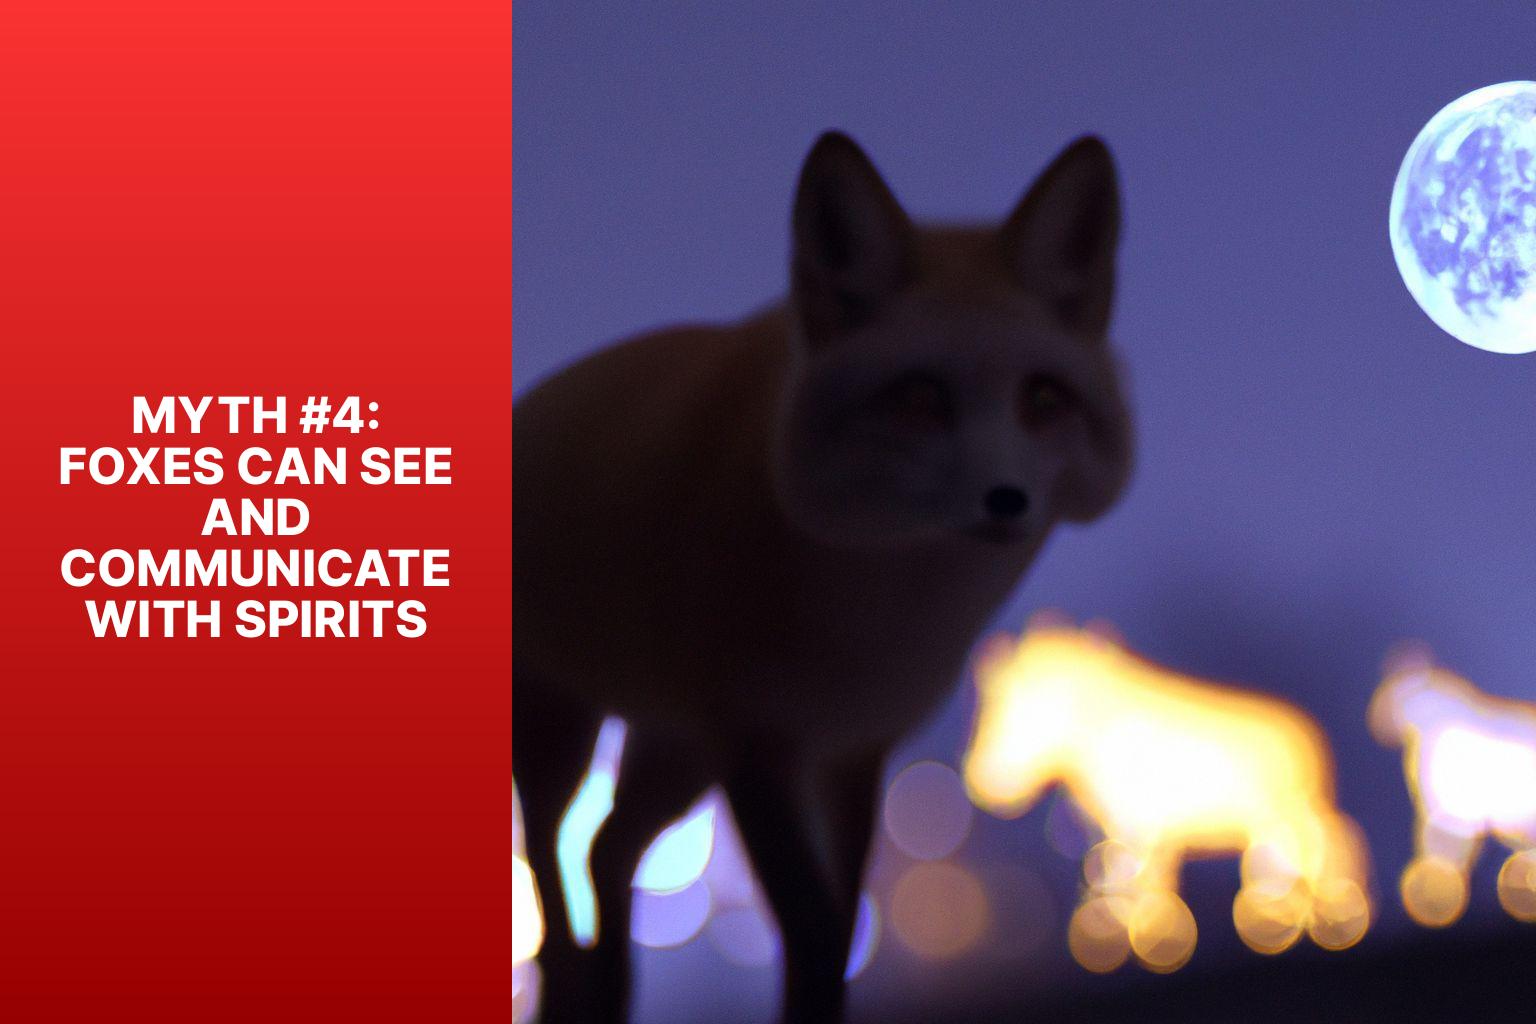 Myth #4: Foxes Can See and Communicate with Spirits - Fox Myths in Parapsychology 